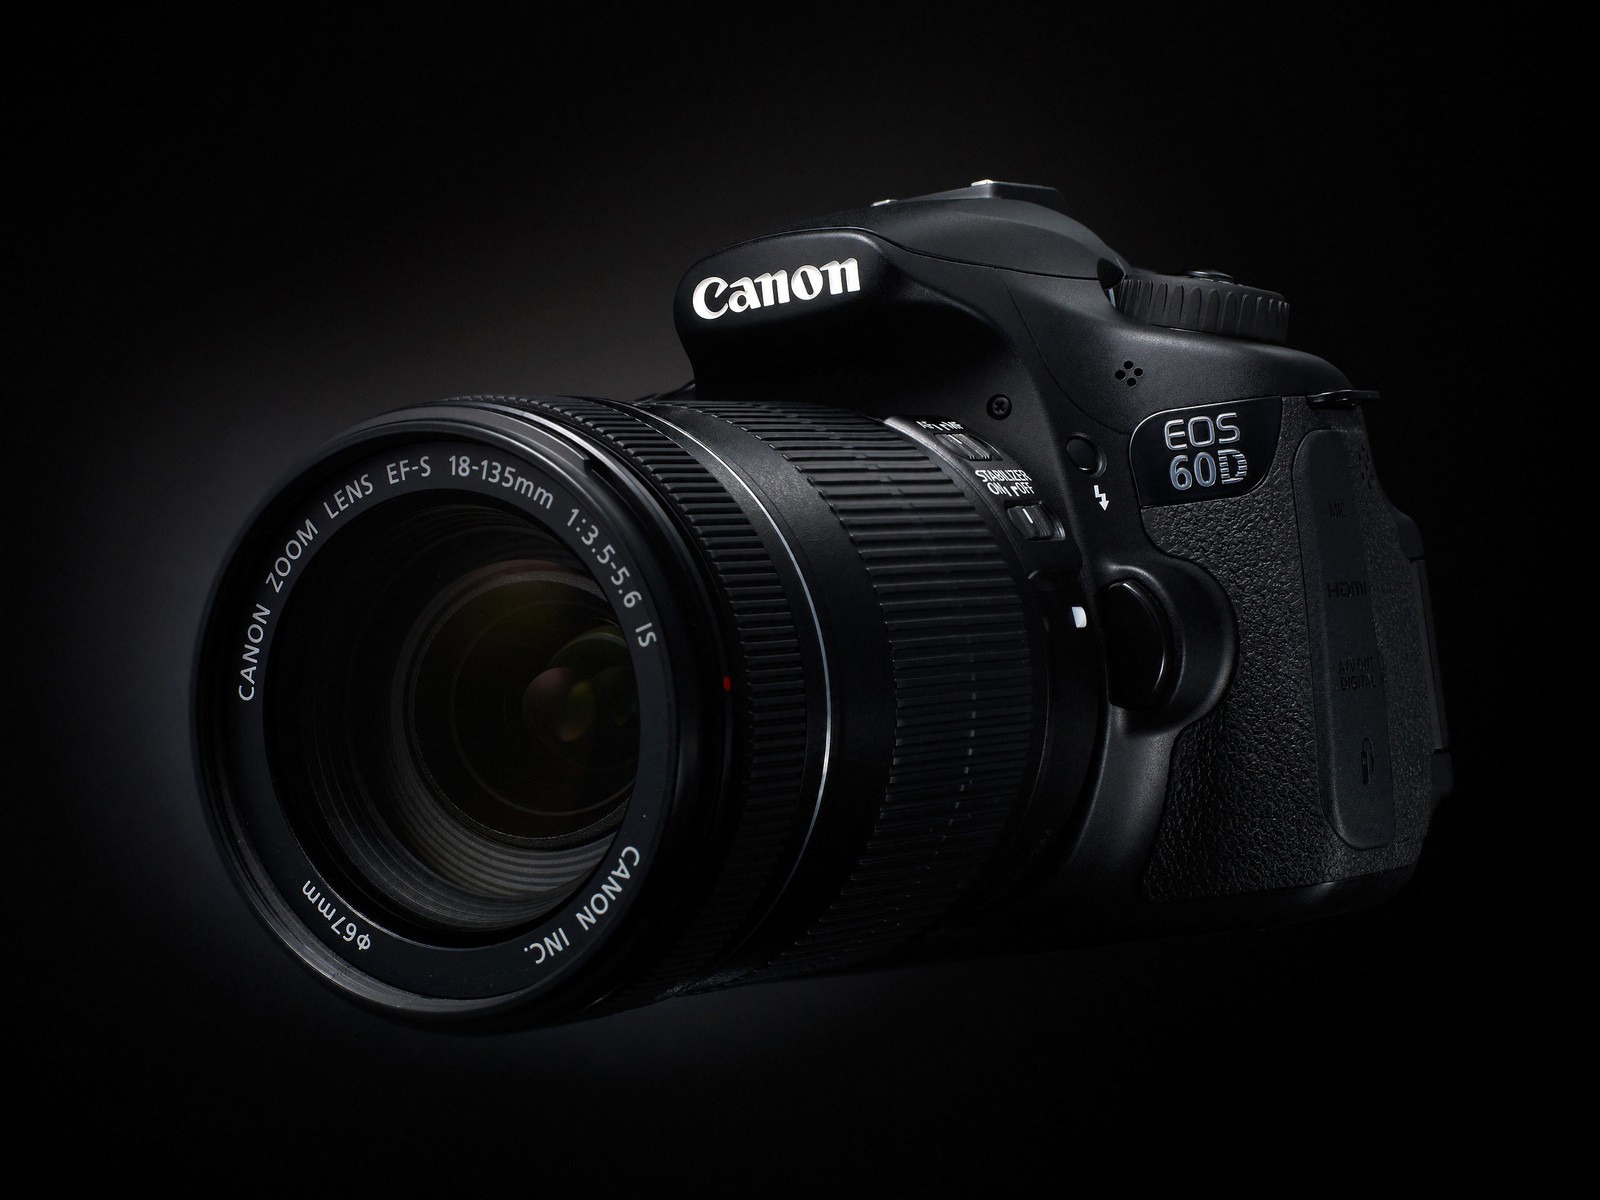 Canon EOS 60D for 1600 x 1200 resolution